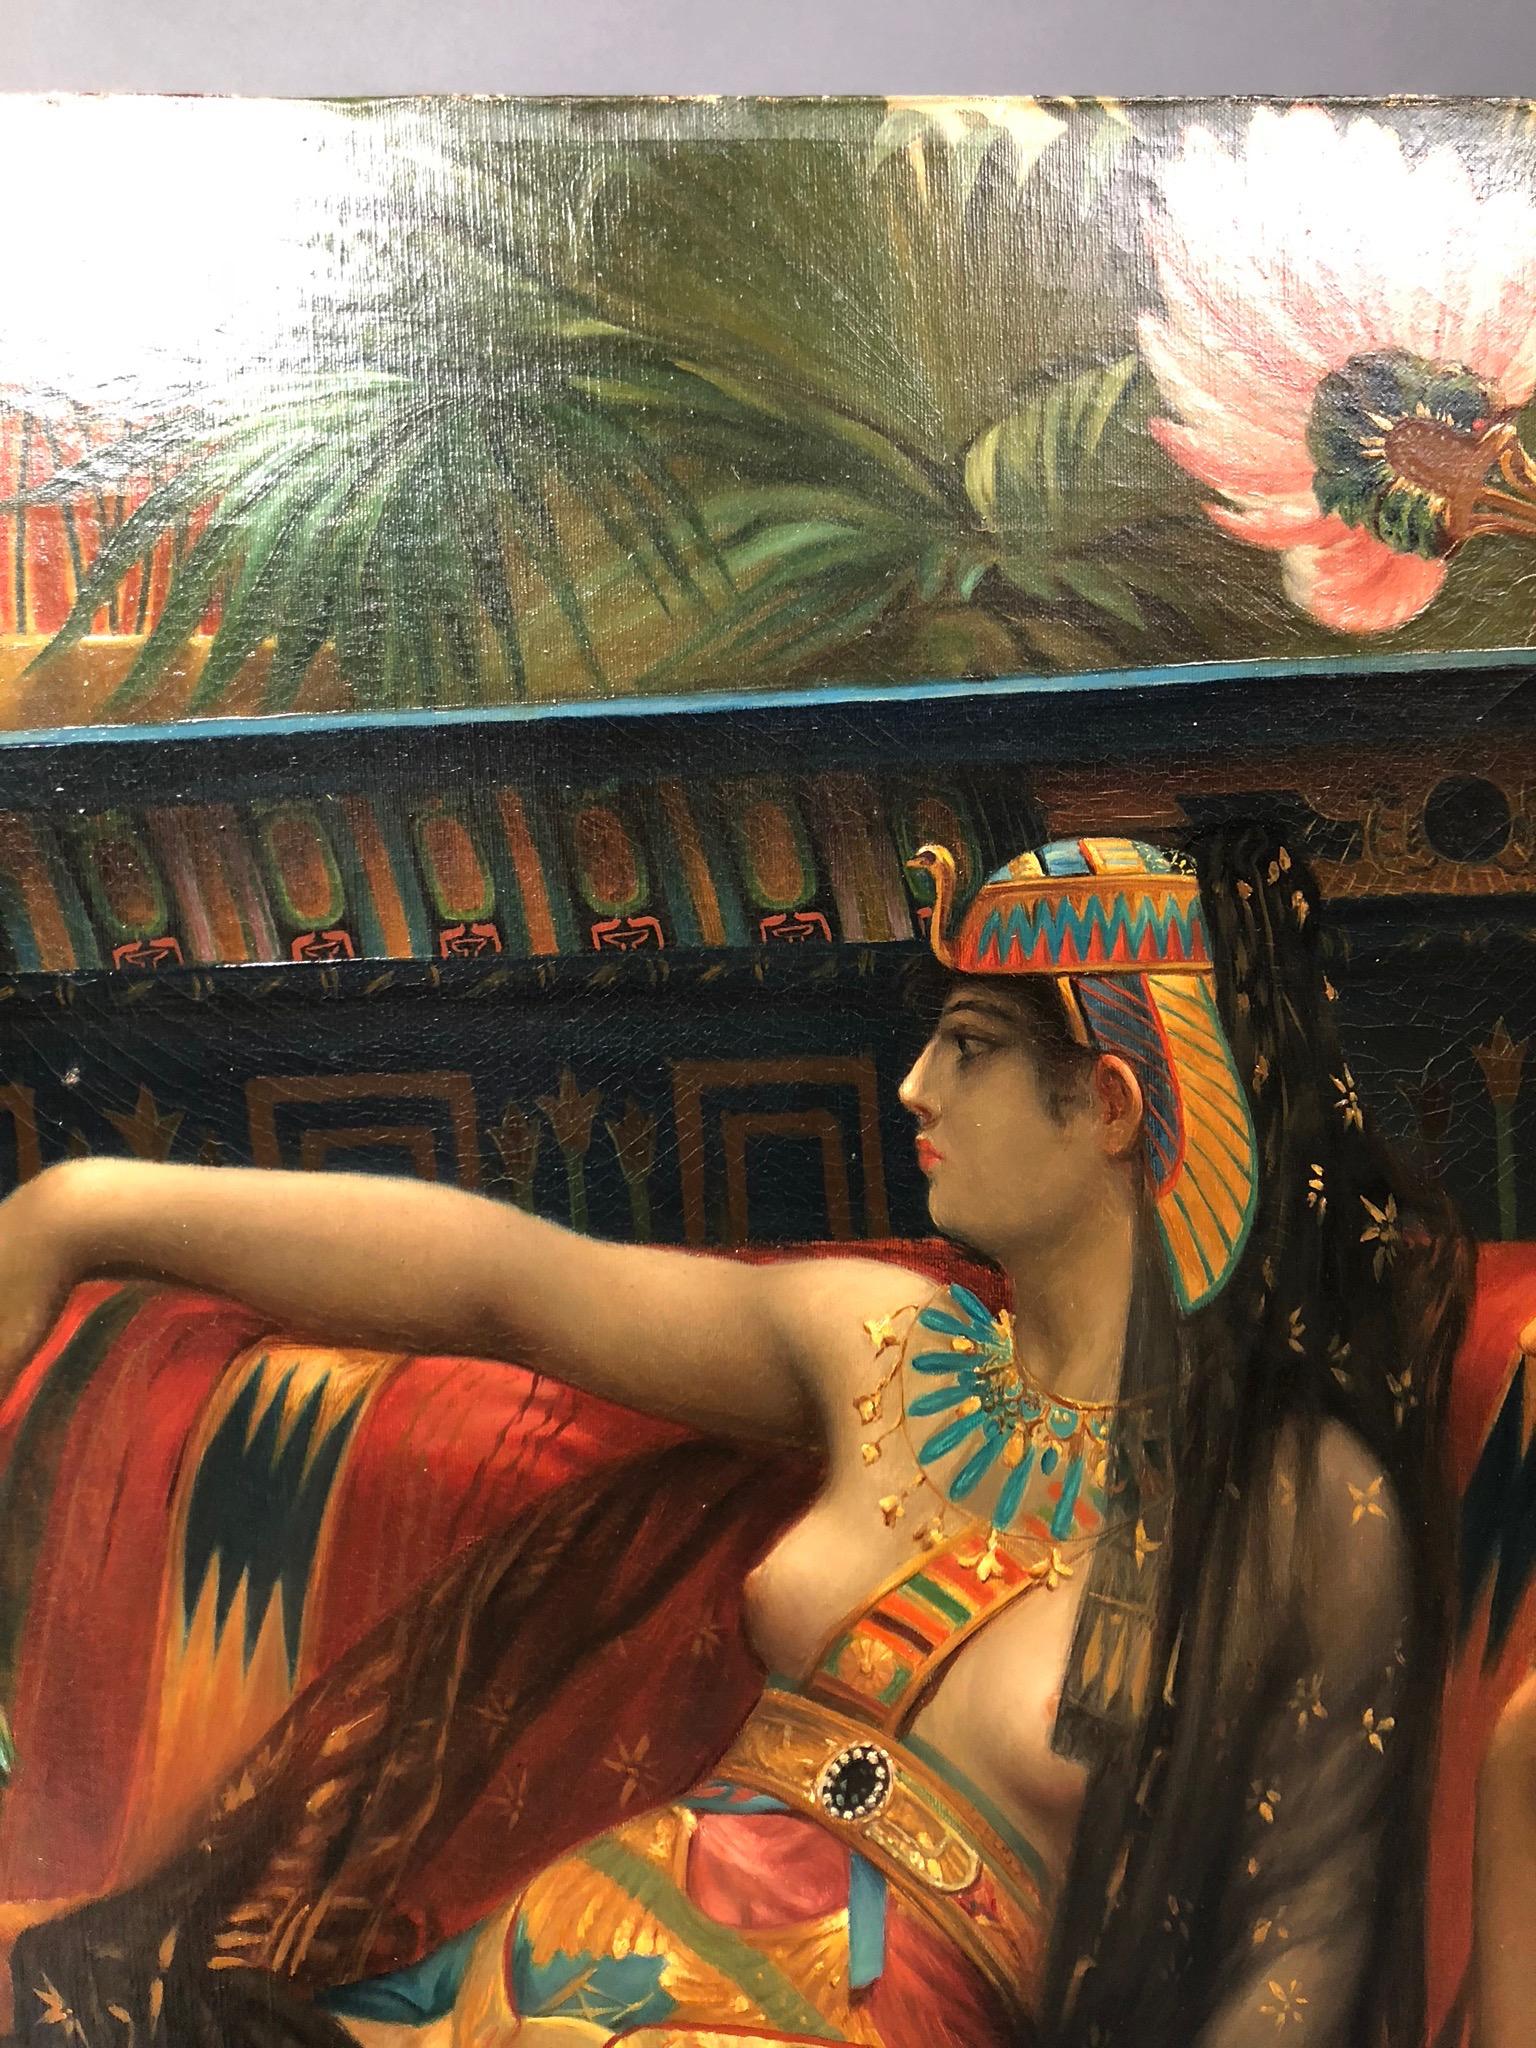 Cleopatra Testing Poison on Condemned Prisoners - Romantic Painting by Alexandre Cabanel